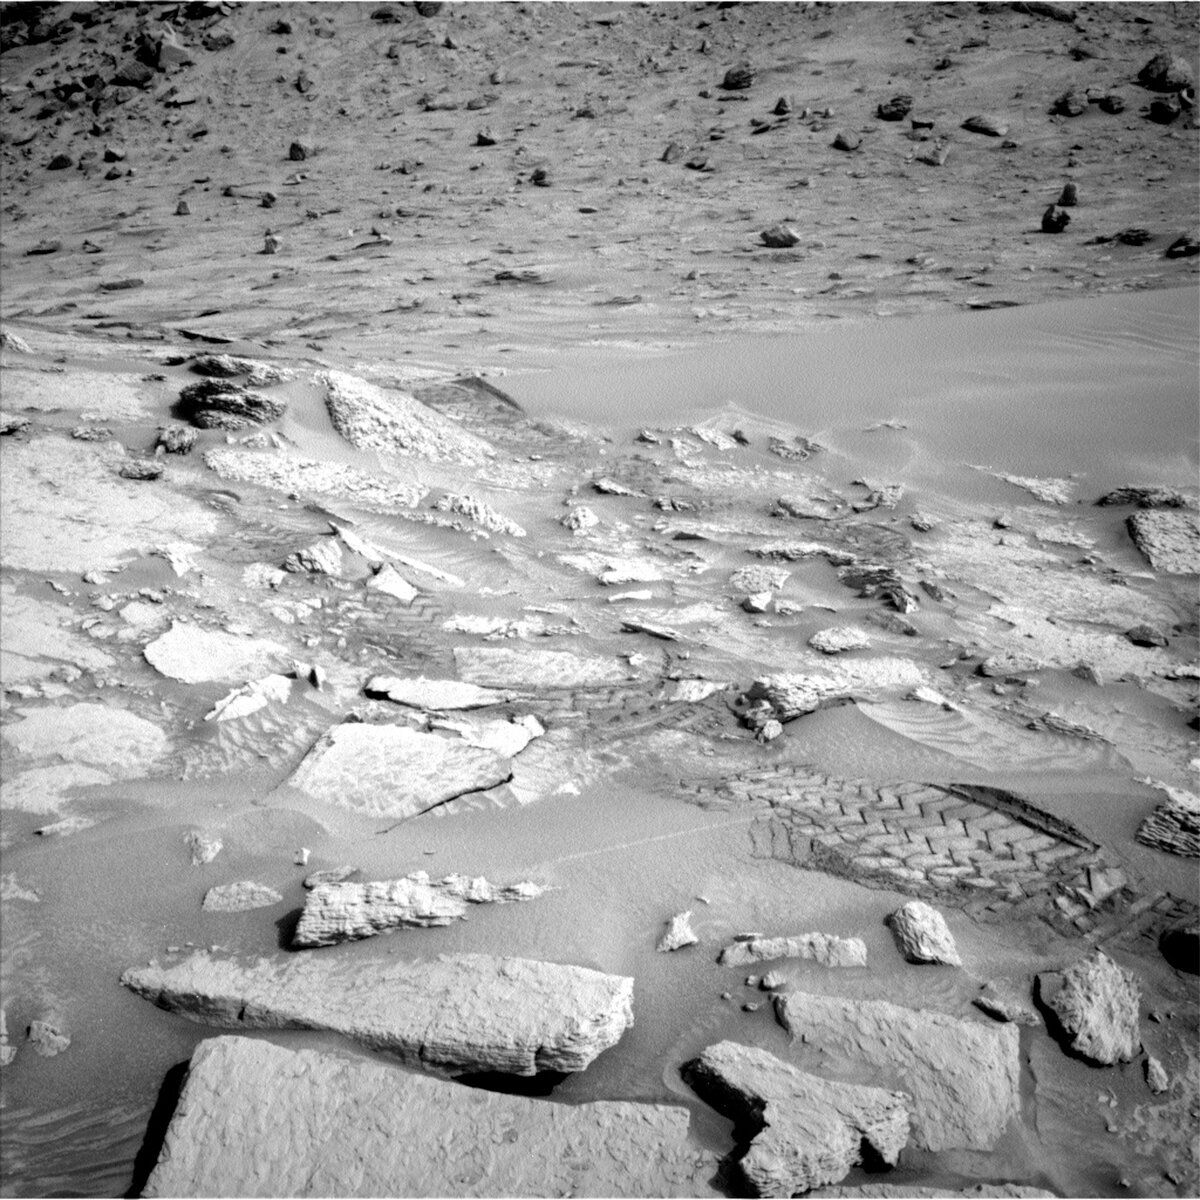 This image shows the Curiosity rover's tracks on sol 3658 and was taken by the left navigation camera.